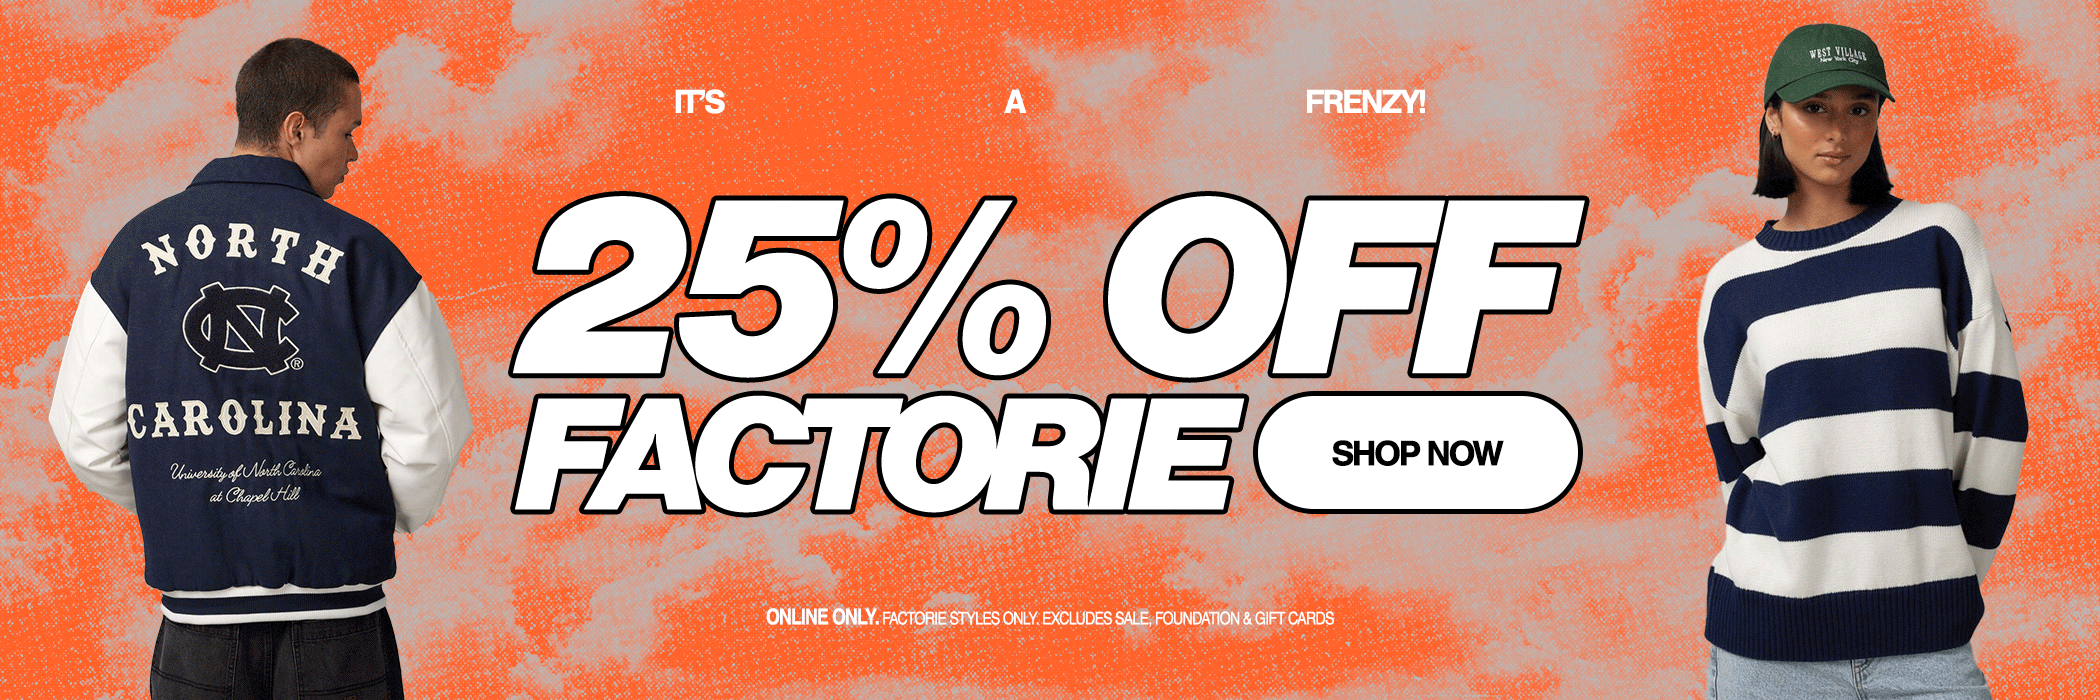 IT'S A FRENZY! 25% OFF FACTORIE!